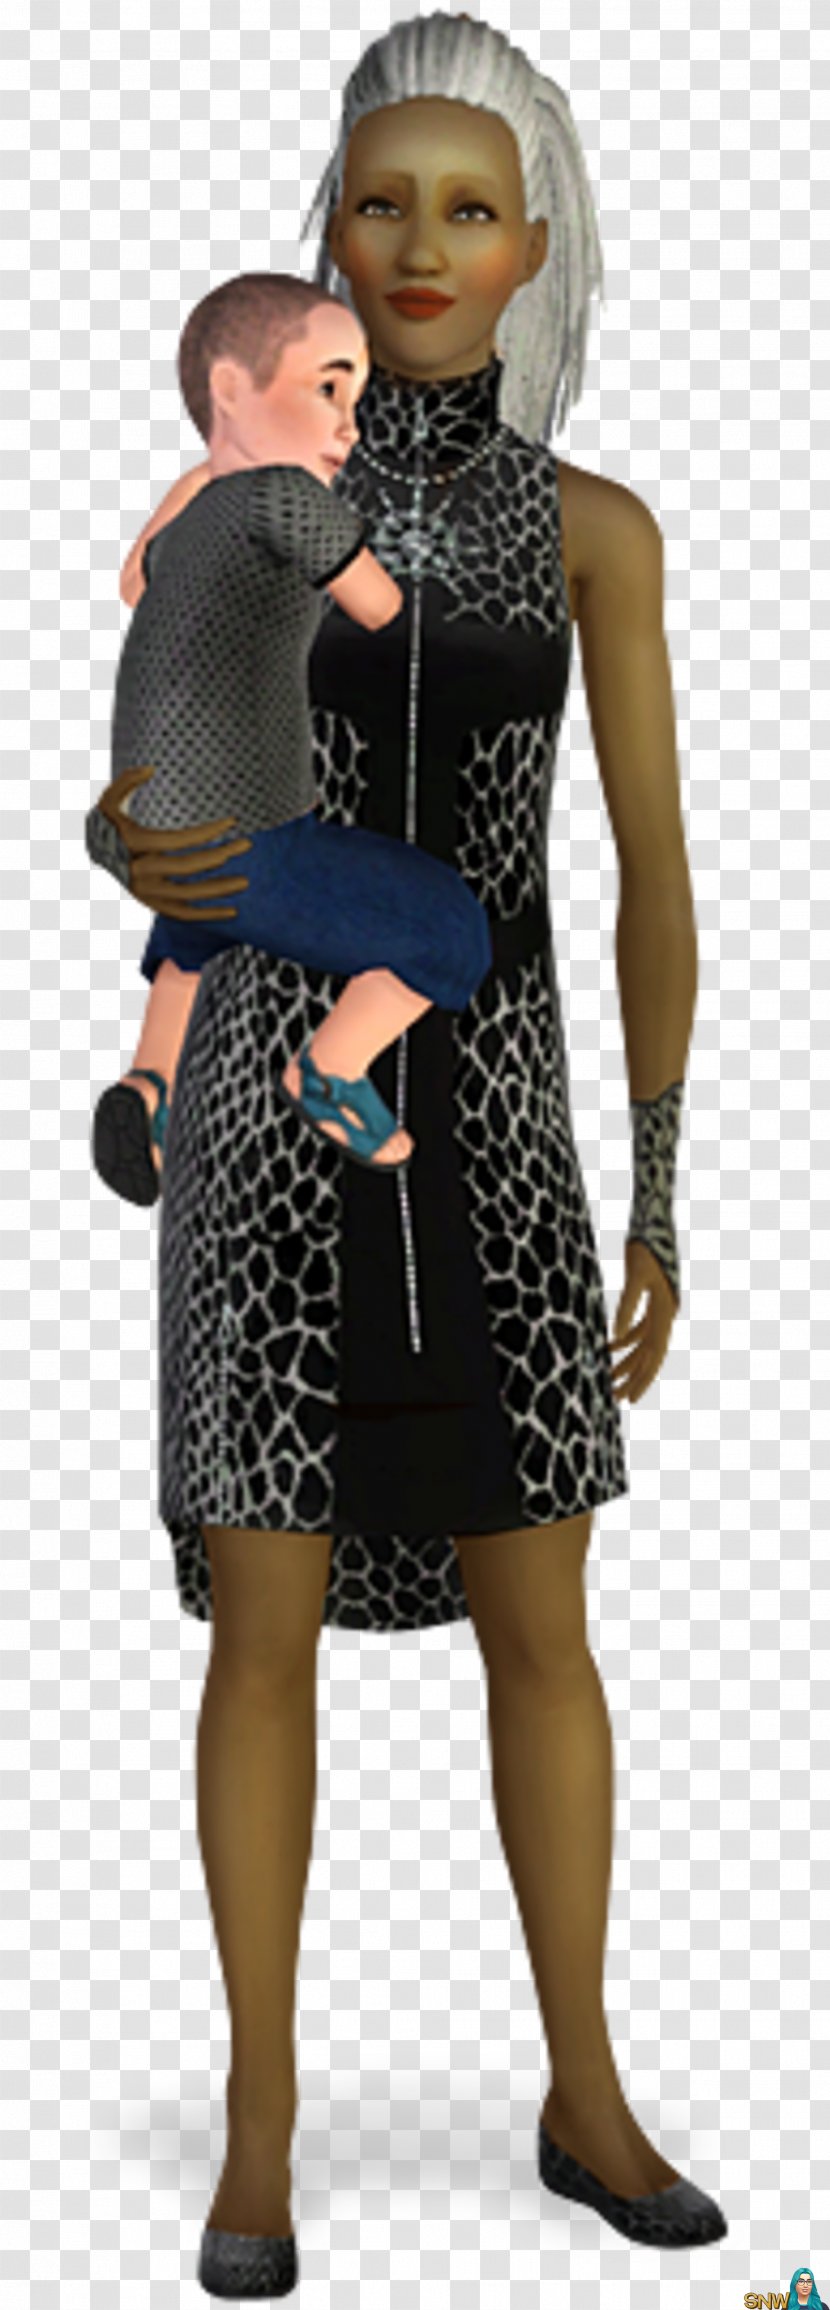 The Sims 2 Game 3: Into Future Mod 4 - 3 Transparent PNG